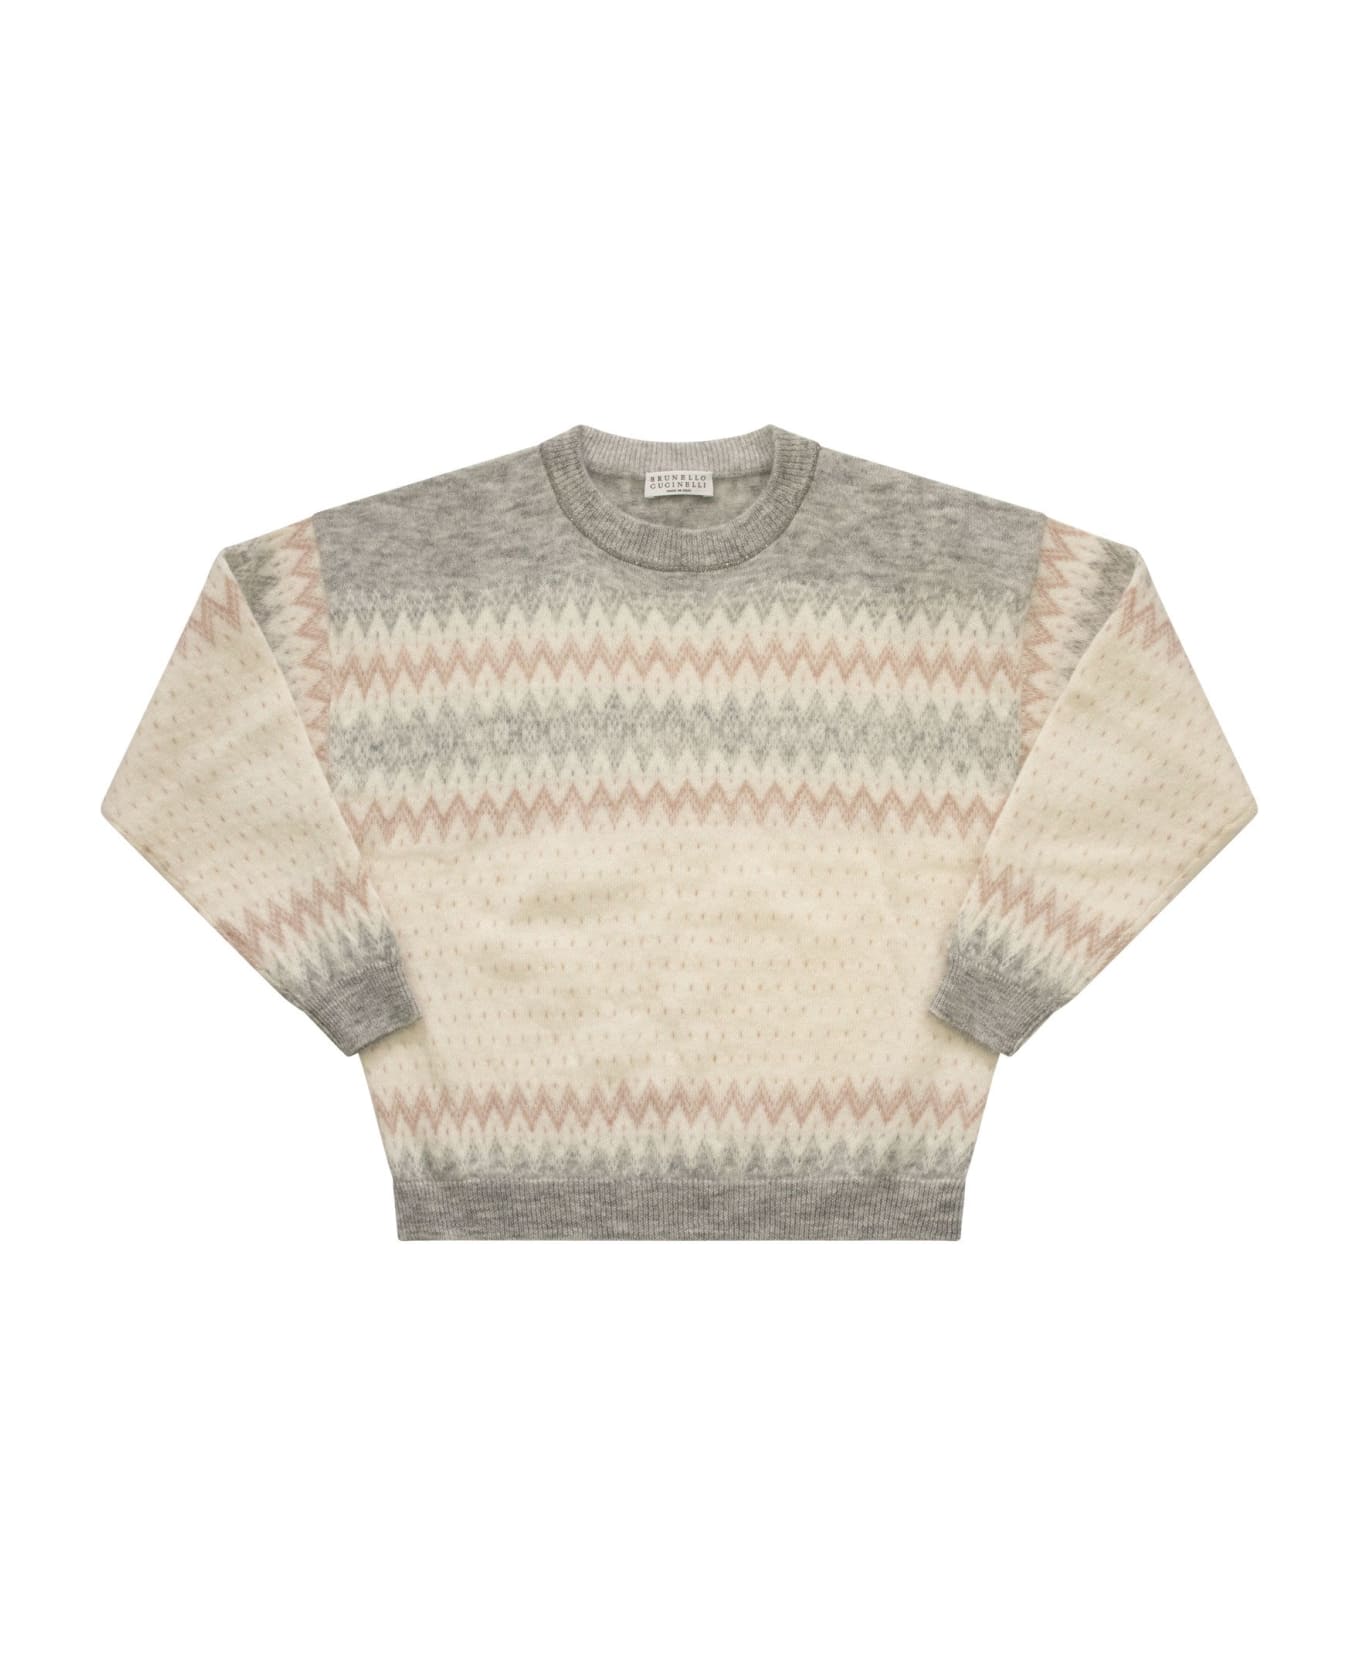 Brunello Cucinelli Mohair And Wool Blend Knitwear - Grey/panama/pink